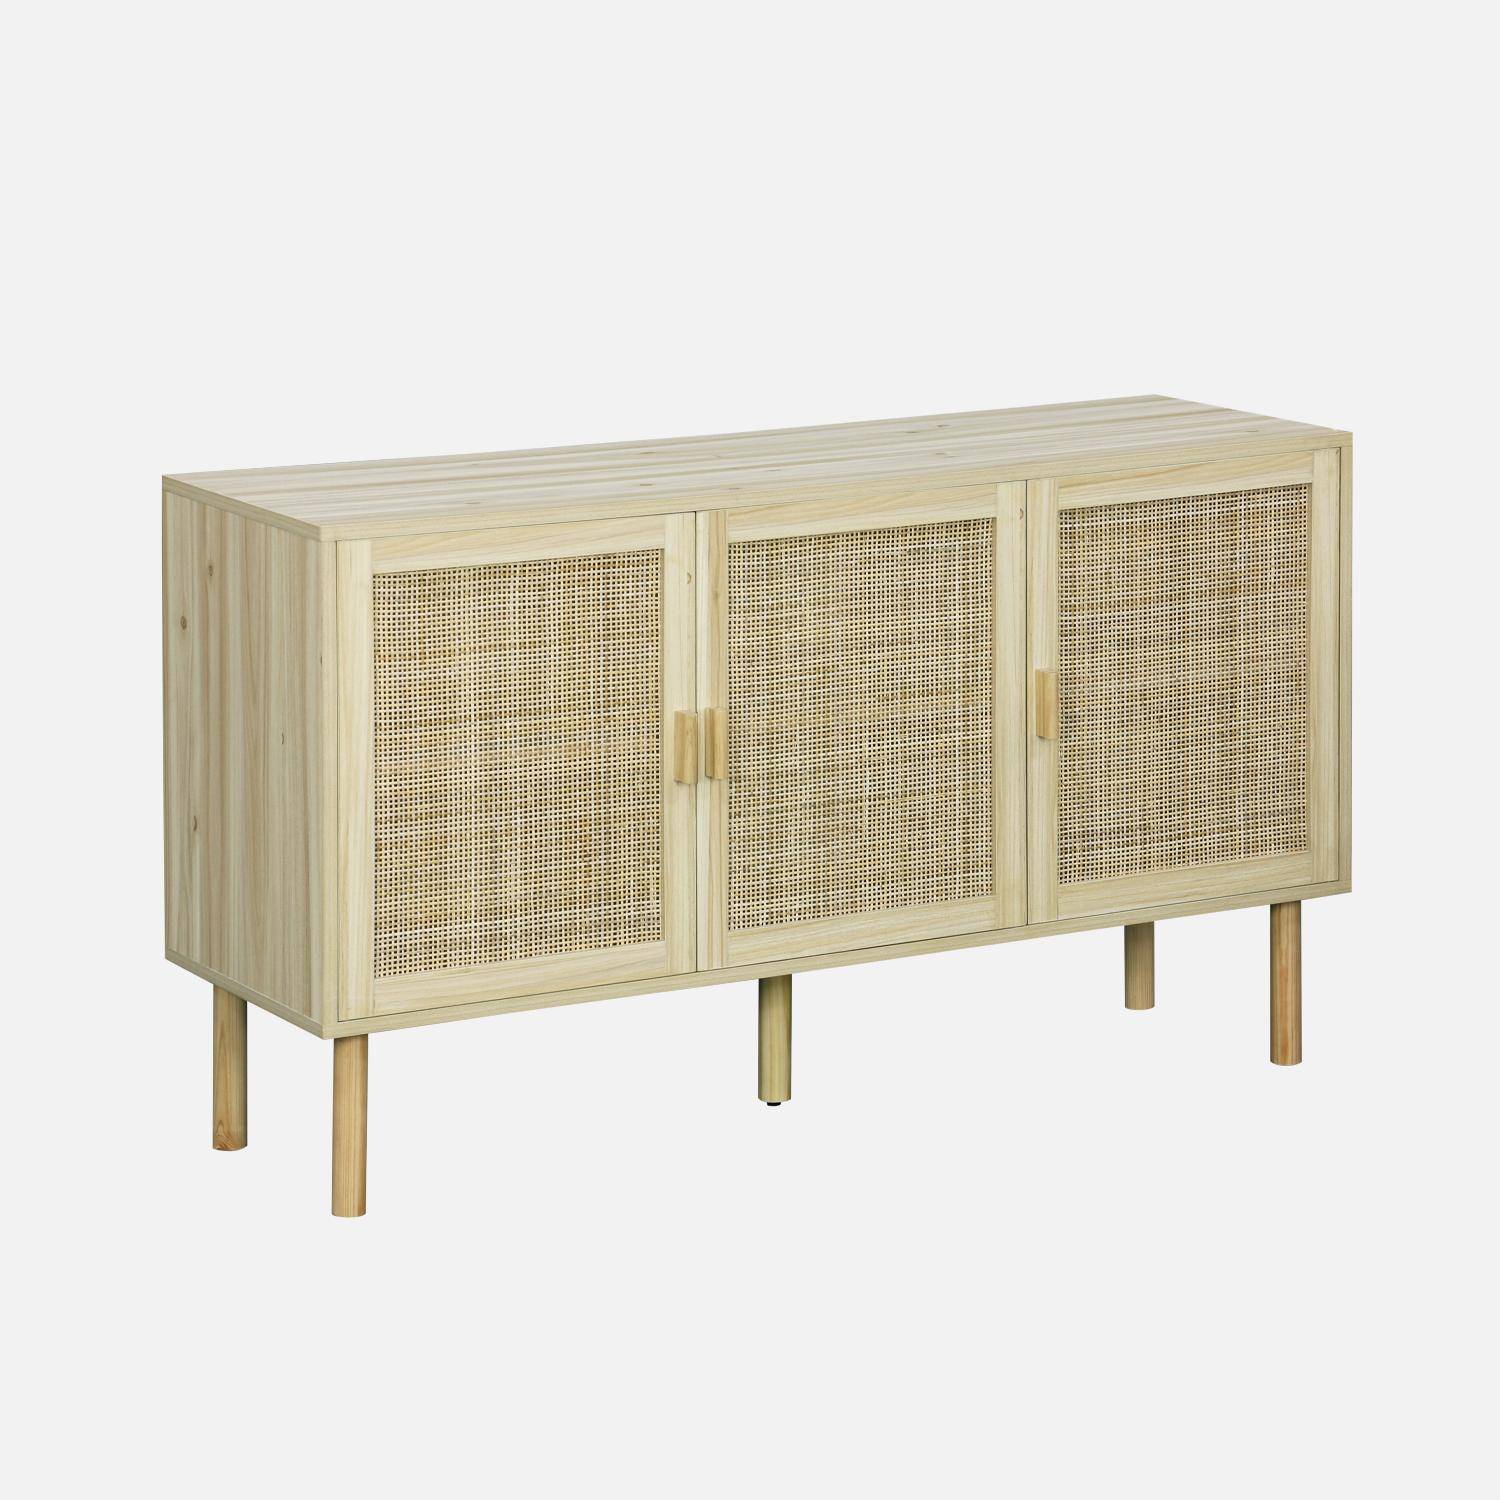 3-door sideboard with 3 shelves in cane and wood effect. Fir wood legs and handles. W 120 x D 39 x H 70cm CAMARGUE,sweeek,Photo1